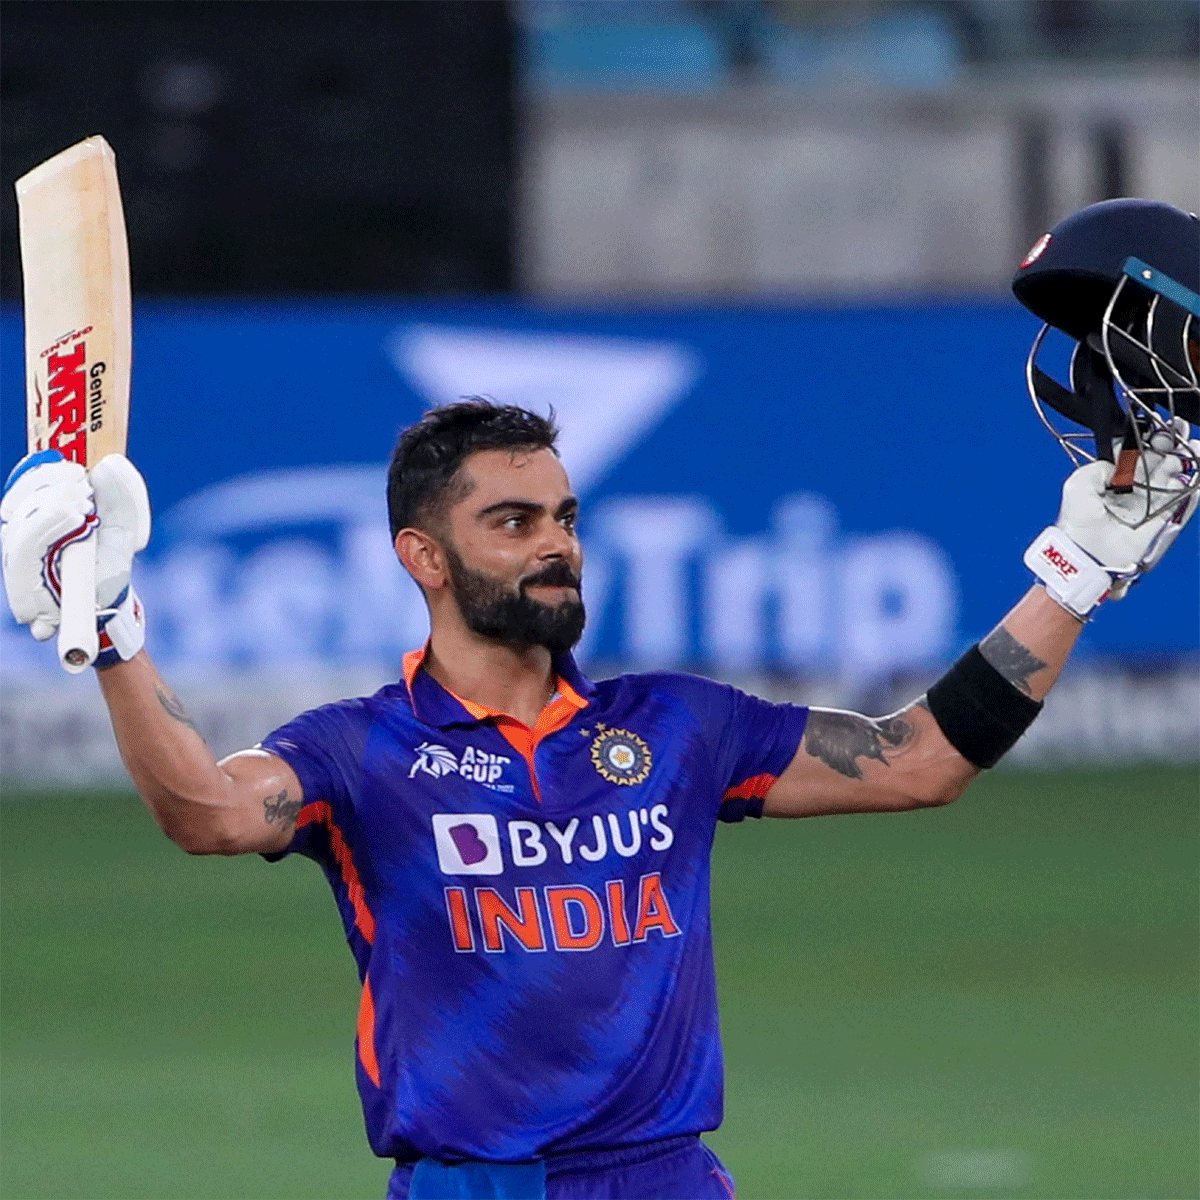 'Virat will end his career in style'